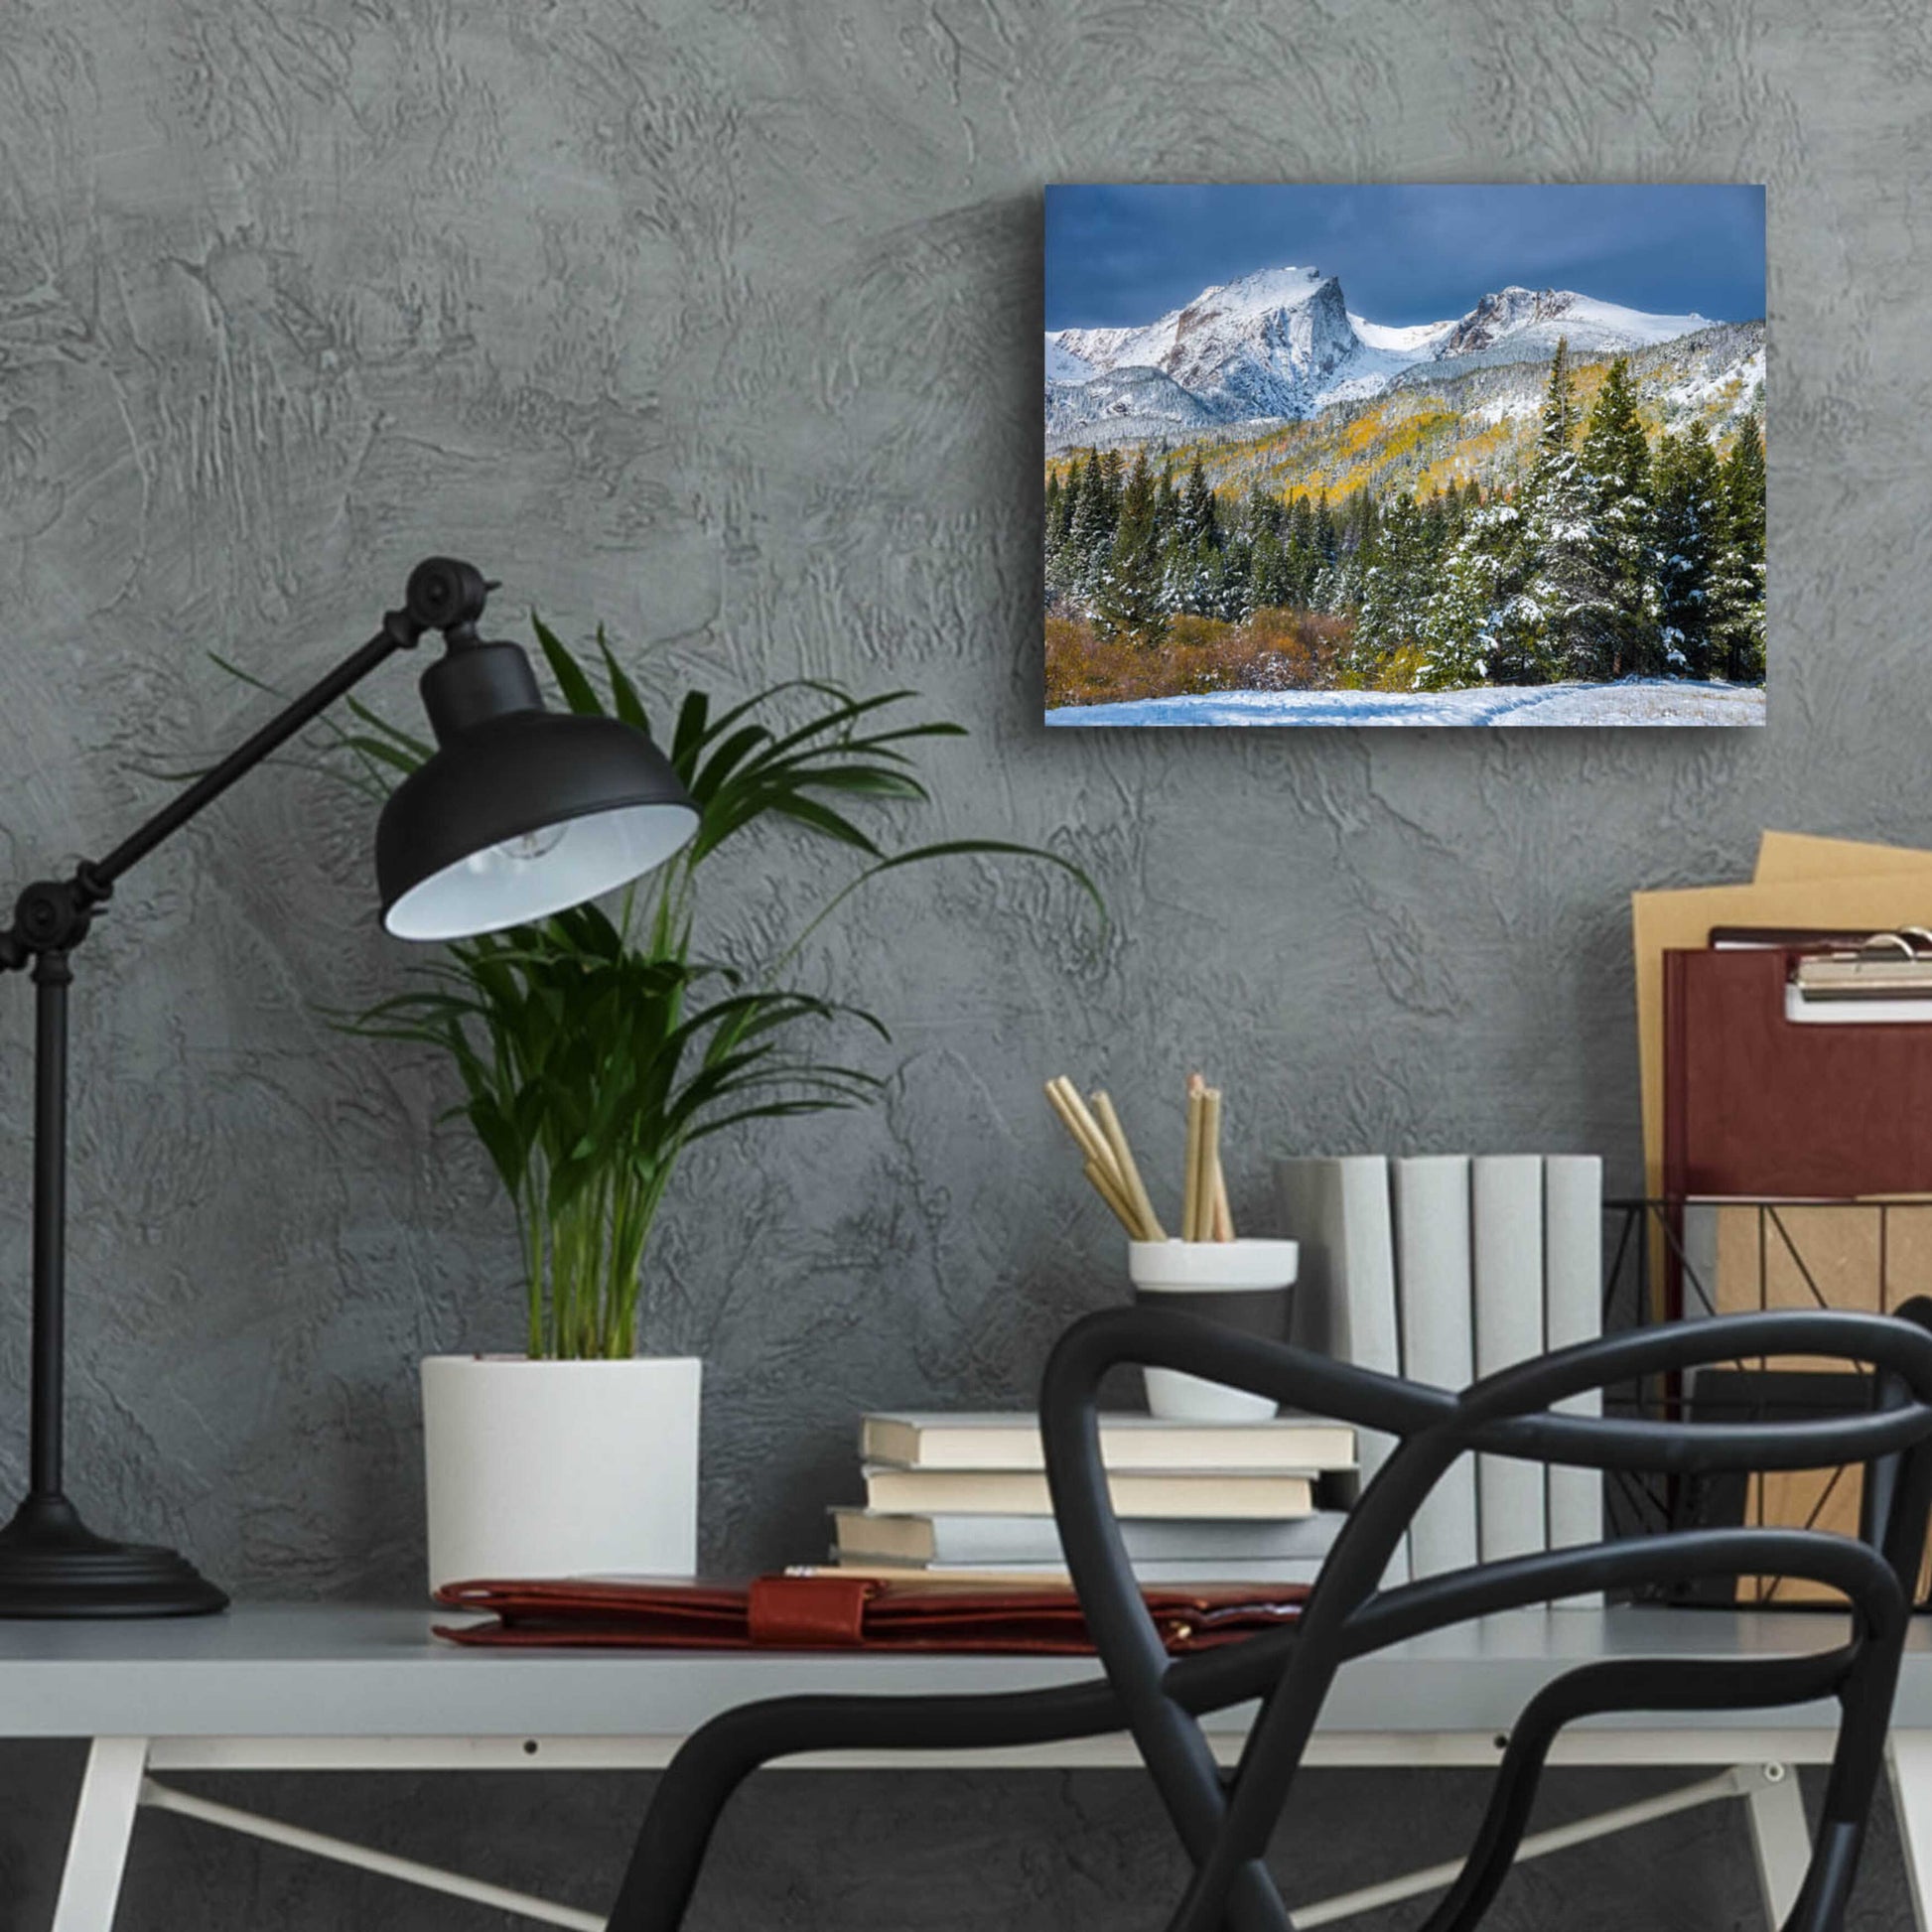 Epic Art 'Christmas In the Rockies - Rocky Mountain National Park' by Darren White, Acrylic Glass Wall Art,16x12